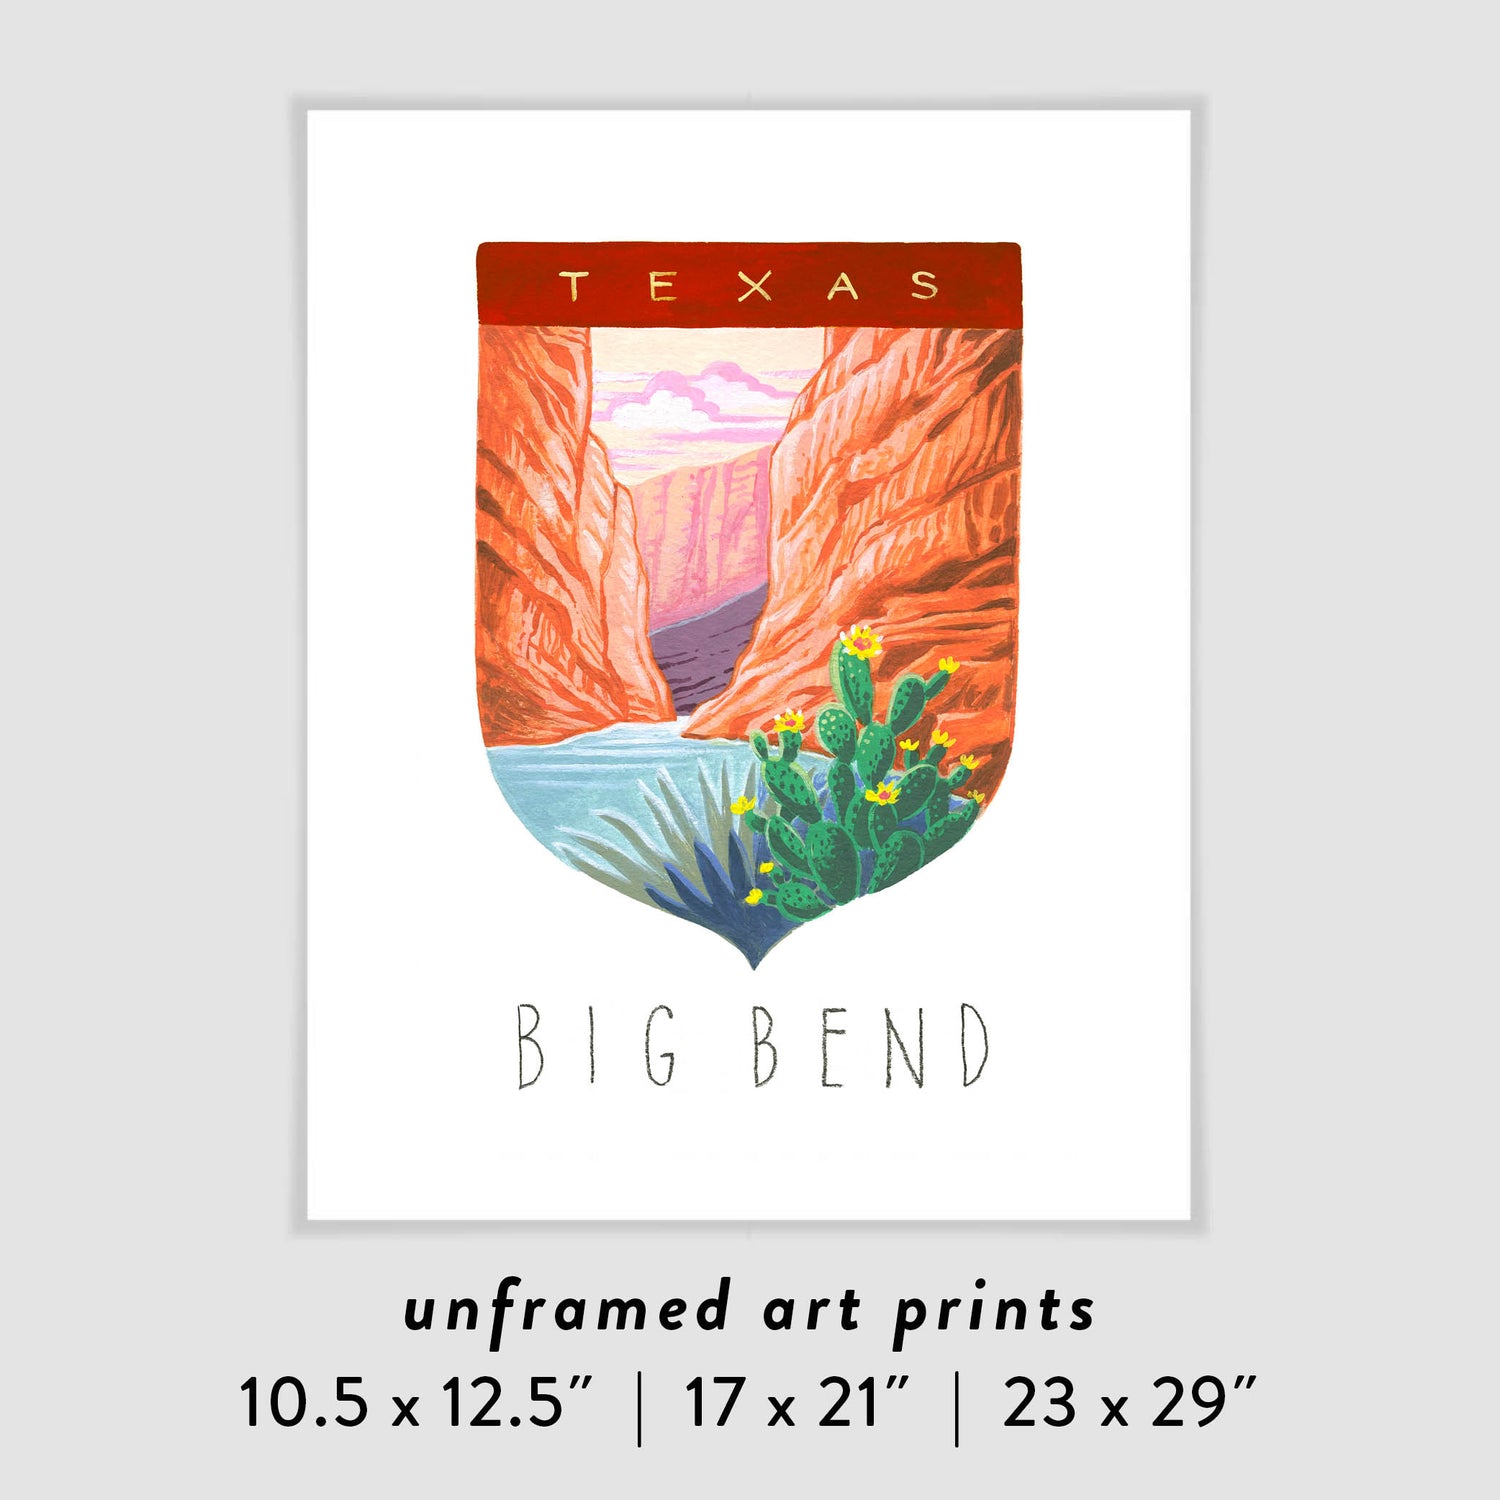 Big Bend National Park art print with Santa Elena Canyon, Rio Grande, limestone cliffs, and cactus with yellow flowers; trendy illustration by Angela Staehling